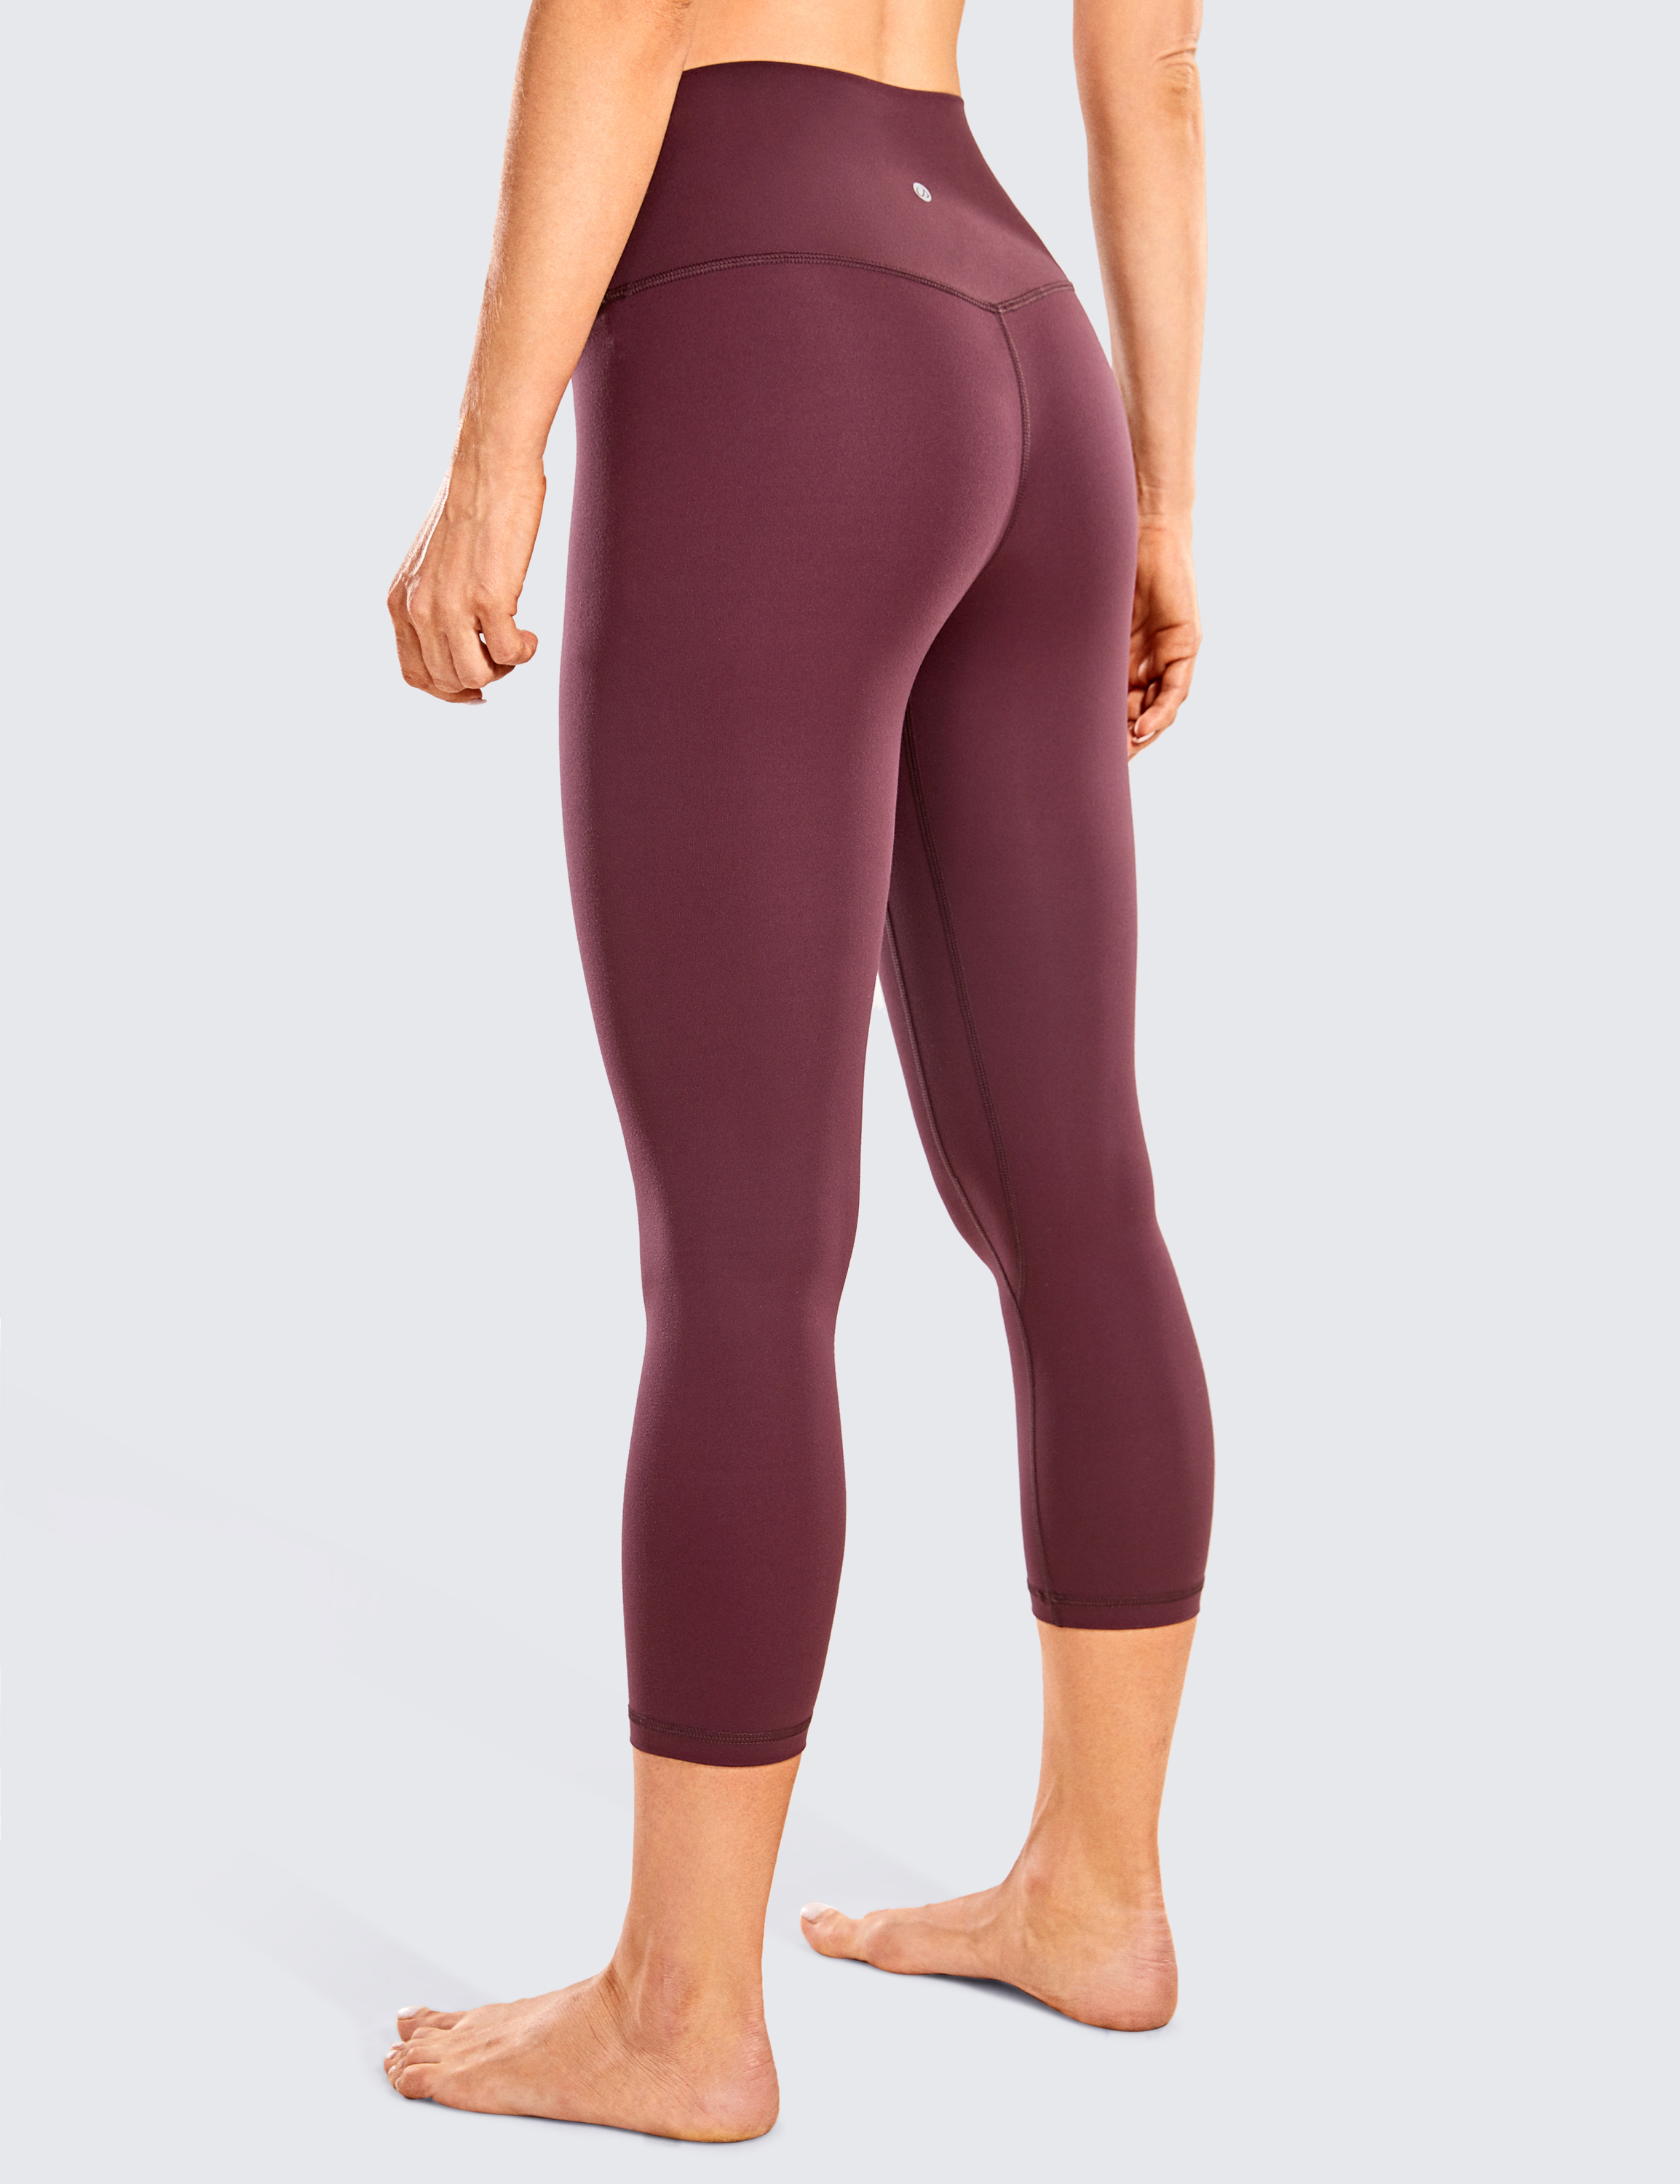 cRZ YOgA Womens Naked Feeling Workout capris Leggings 23 - High Waisted gym  Tummy control Yoga Pants with Pockets Sepia Small on OnBuy